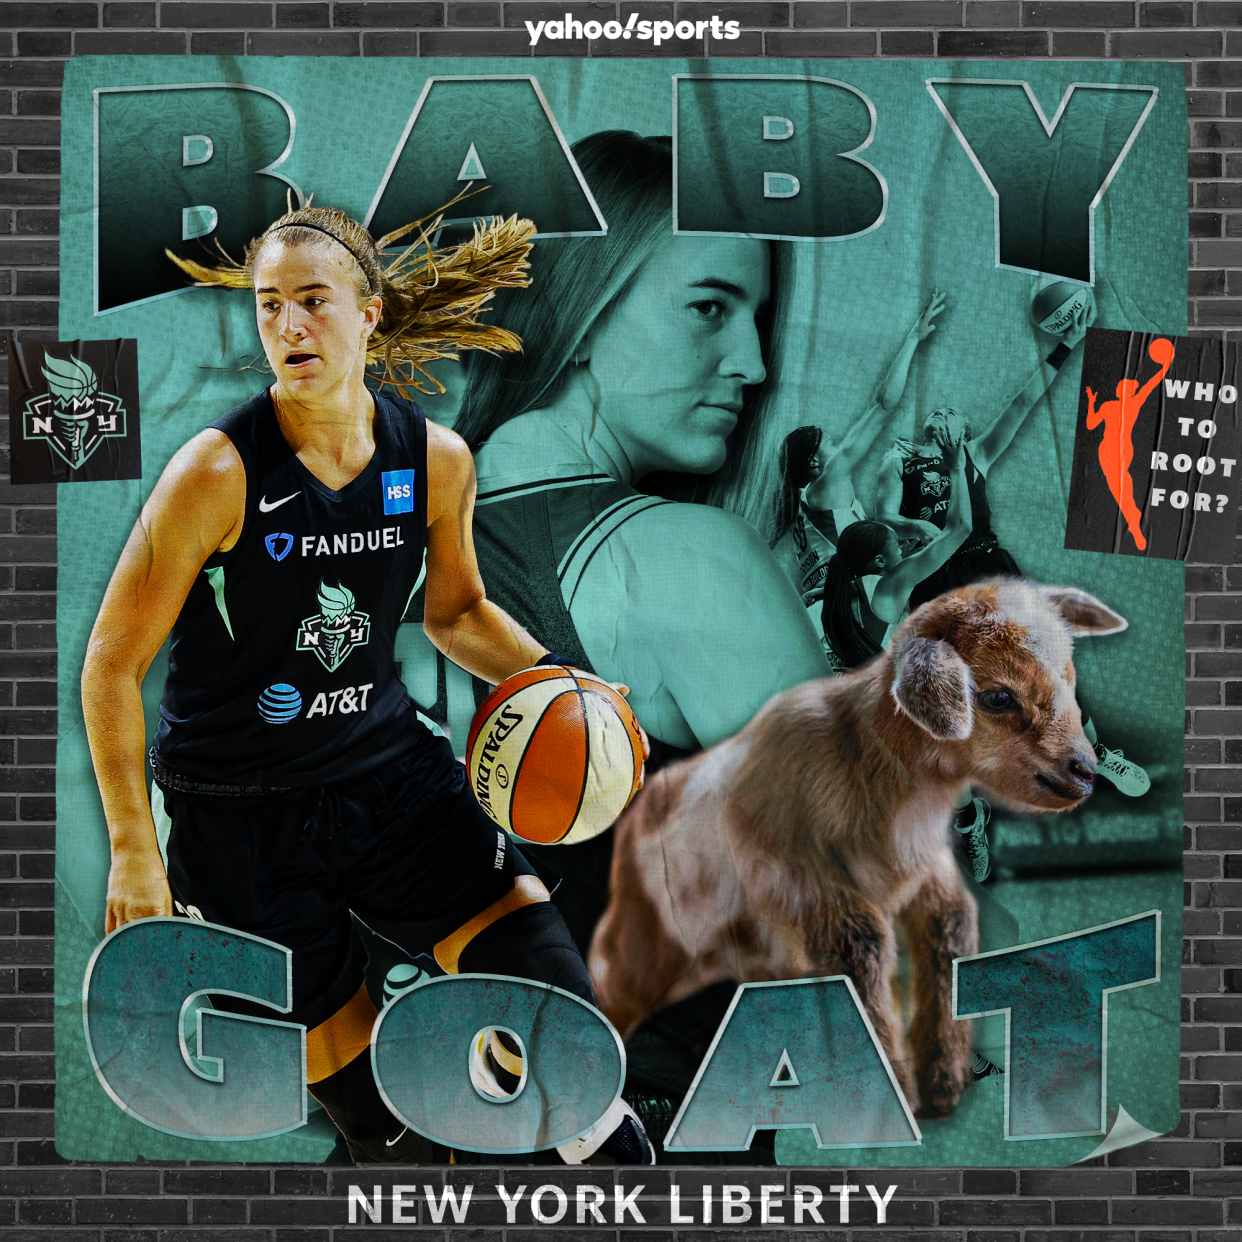 Graphic with Who to root for? The New York Liberty with Sabrina Ionescu and a goat with the words 